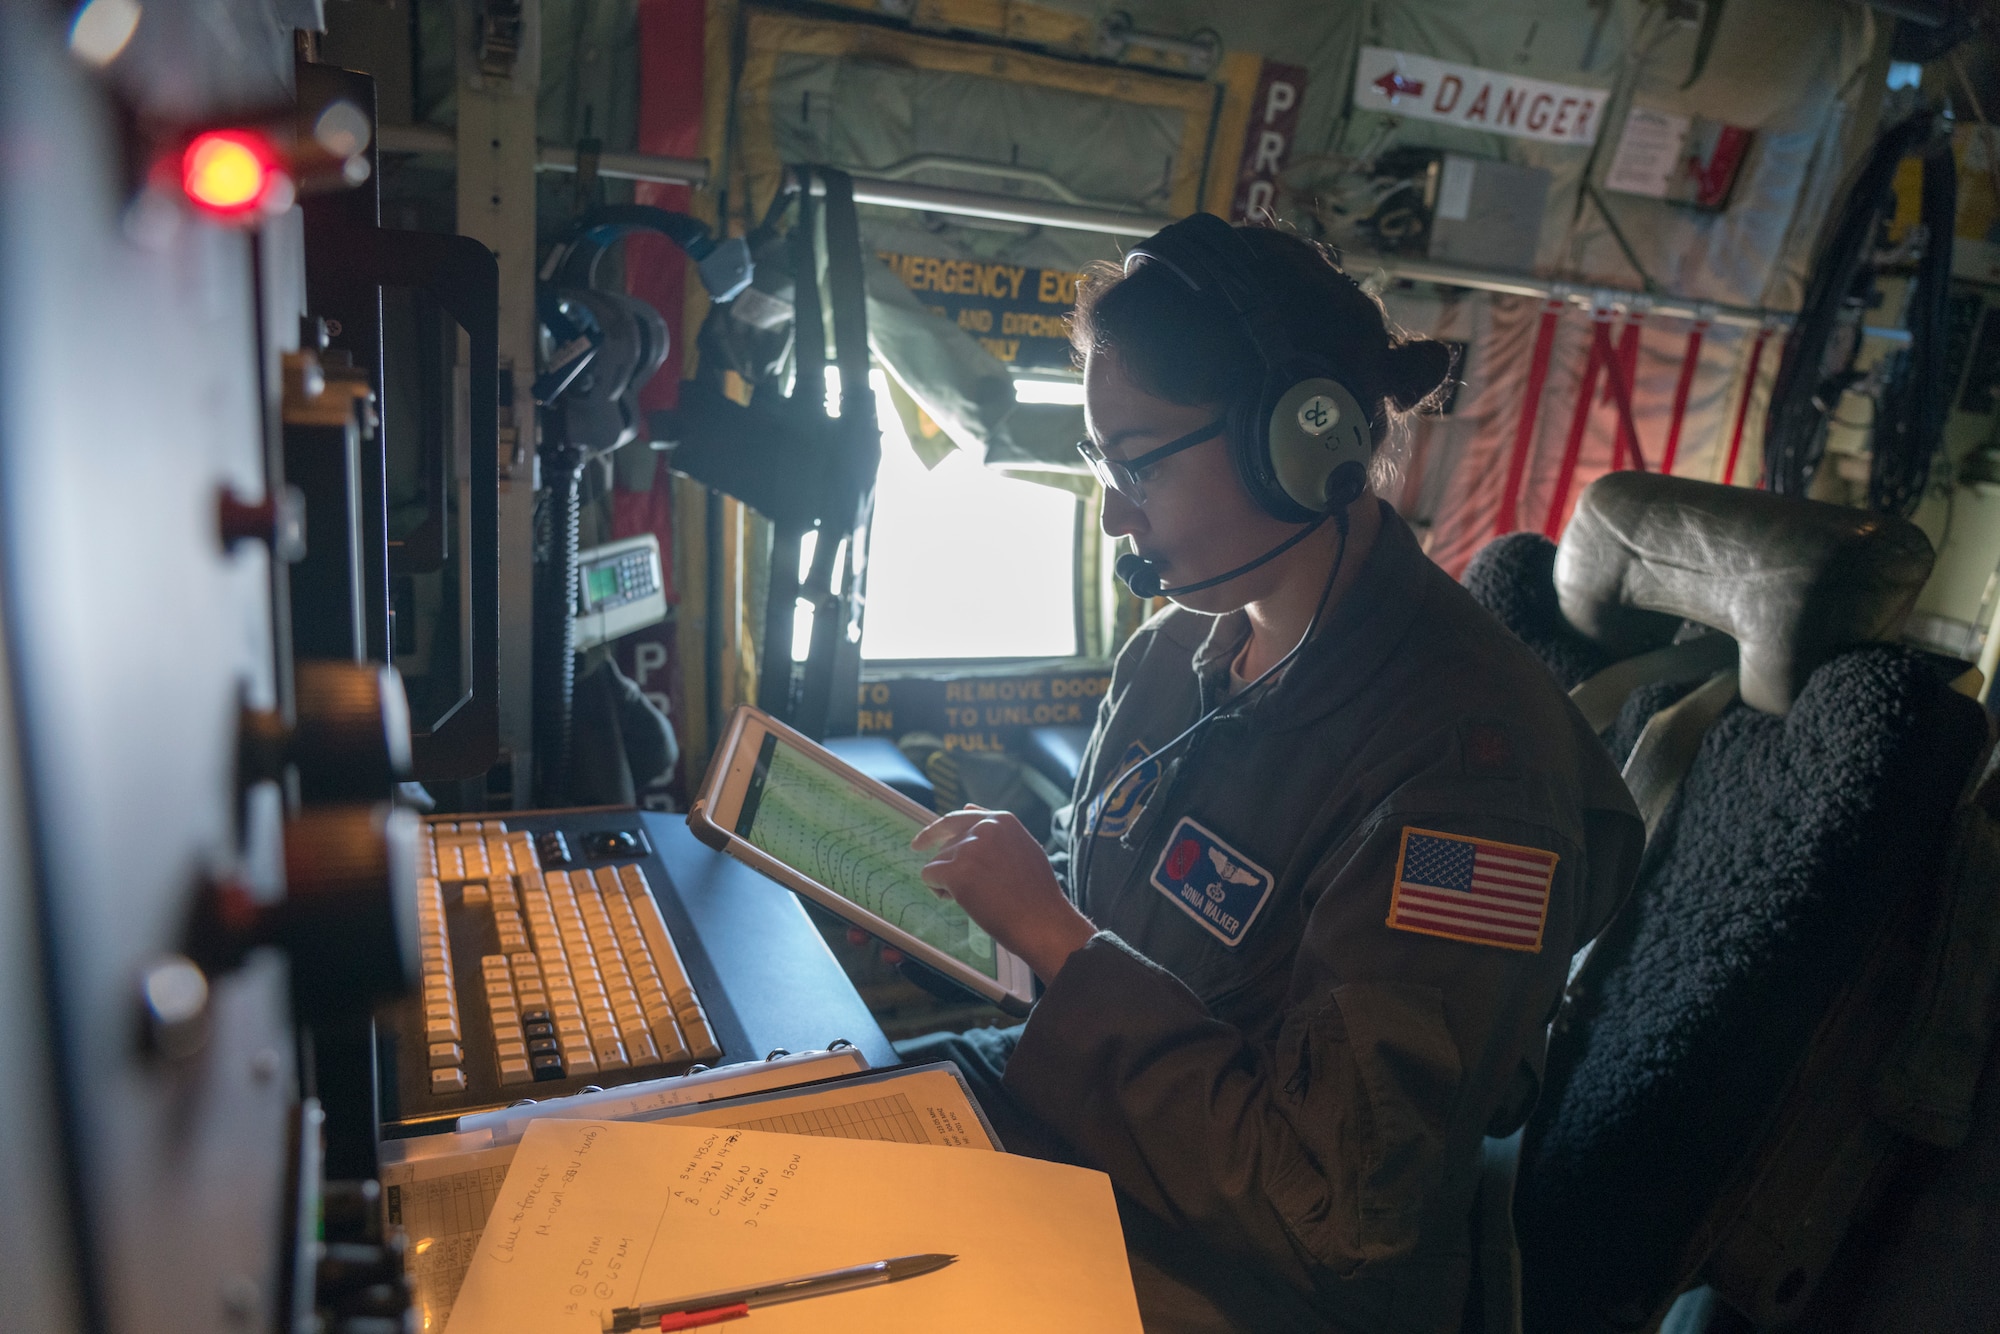 Maj. Sonia Walker, 53rd Weather Reconnaissance Squadron aerial weather reconnaissance officer, checks her tablet for information during an atmospheric river mission Jan. 28, over the Pacific Ocean. The Hurricane Hunters are slated to perform “AR recon” from January through March. Scientists led by Scripps Institution of Oceanography at University of California, San Diego, in partnership with the 53rd WRS, National Oceanic and Atmospheric Aviation’s National Weather Service and Office of Marine and Aviation Operations, will be on standby to fly through these ARs over the Pacific to gather data to improve forecasts. (U.S. Air Force photo by Tech. Sgt. Christopher Carranza)